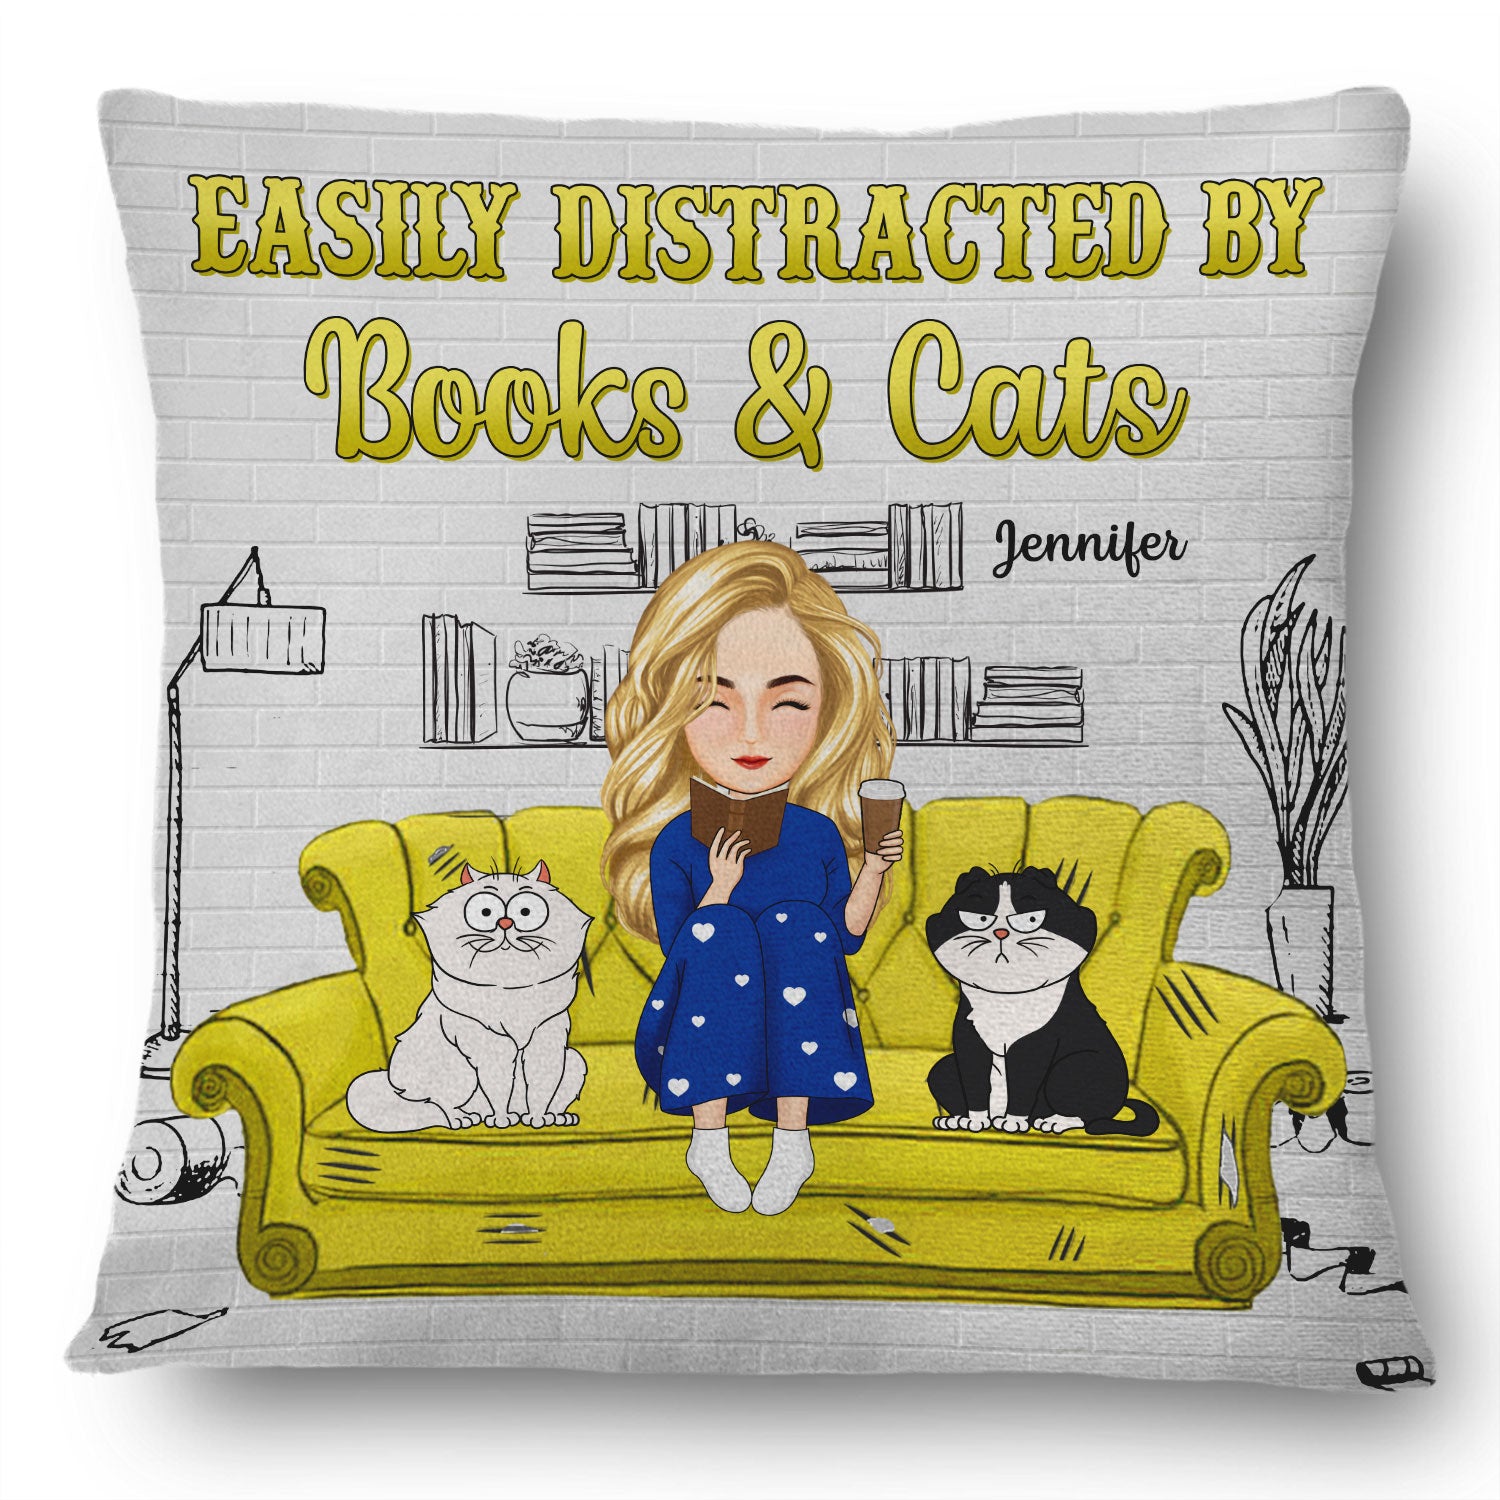 Reading Easily Distracted By Books & Pets - Gift For Book Lovers, Pet Lovers - Personalized Pillow